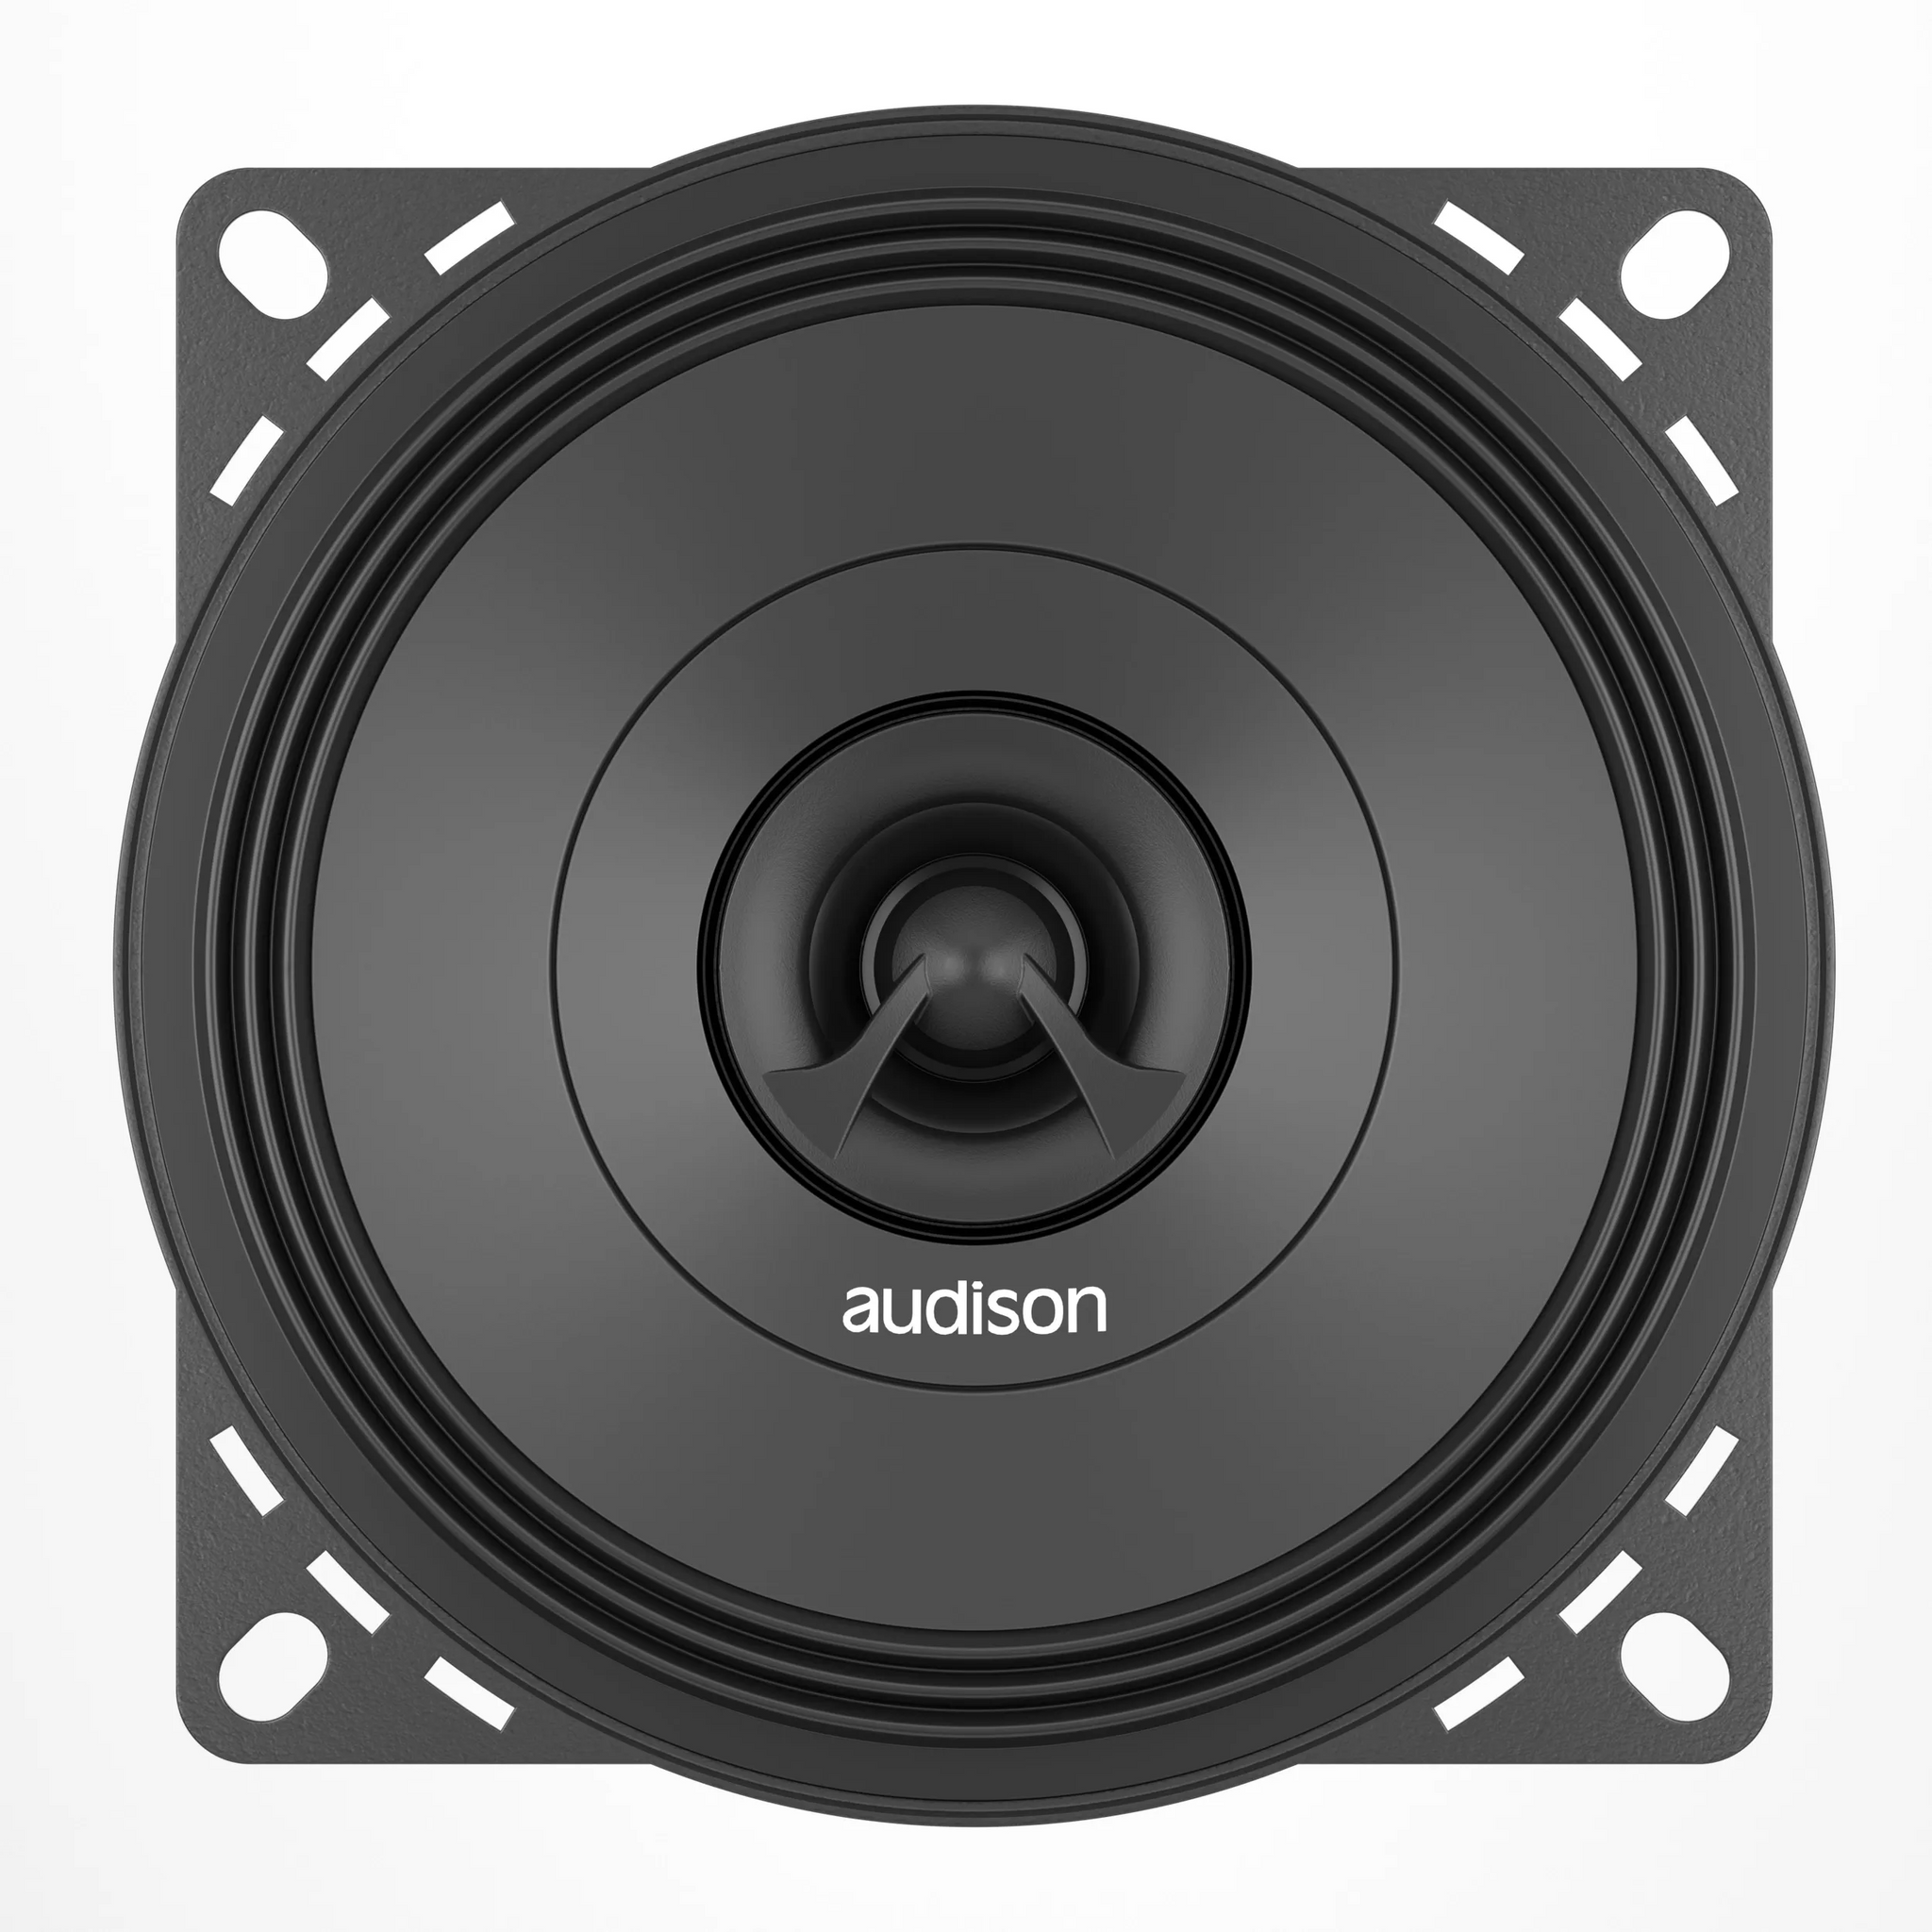 AUDISON APX 4 Coaxial Speaker: Elevate your audio experience with precision-designed concentric coaxial tweeters, ensuring a consistent and immersive sound response.